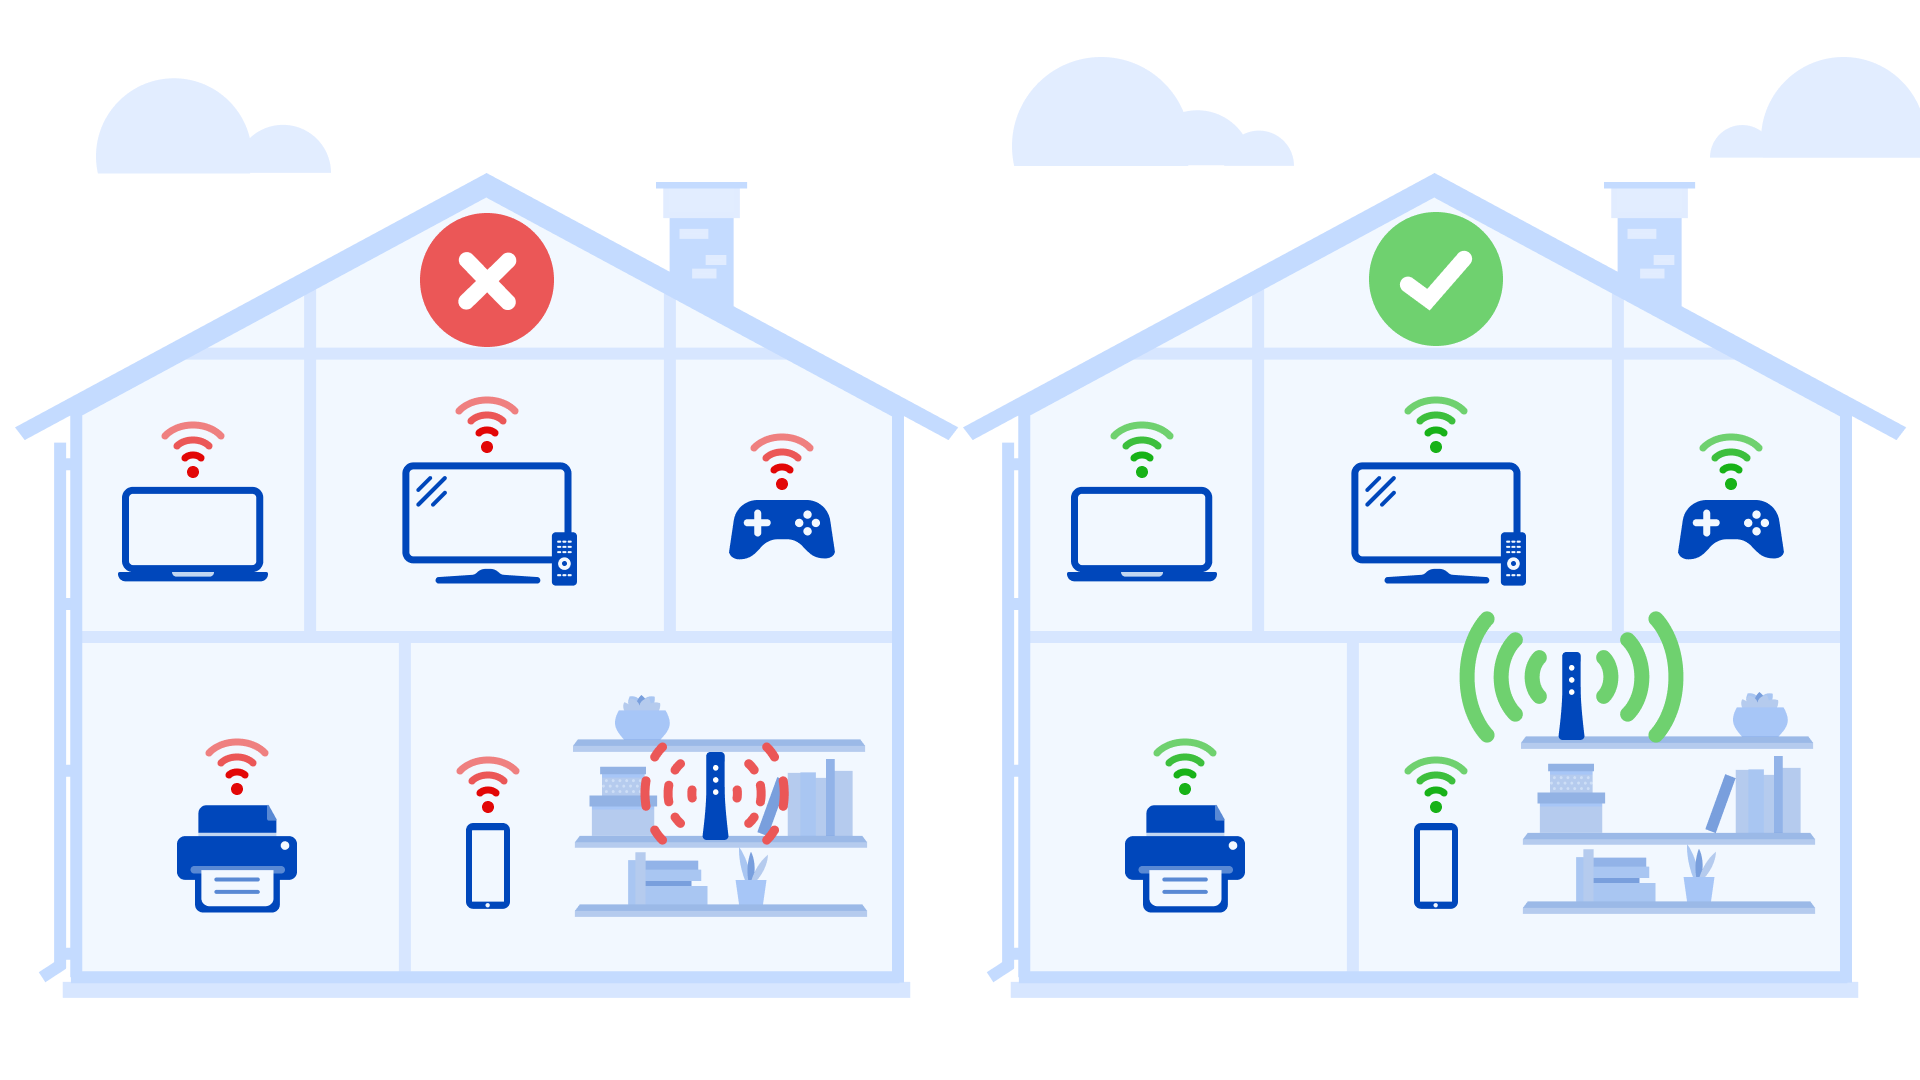 WiFi 6 vs 5G: What's the Difference?